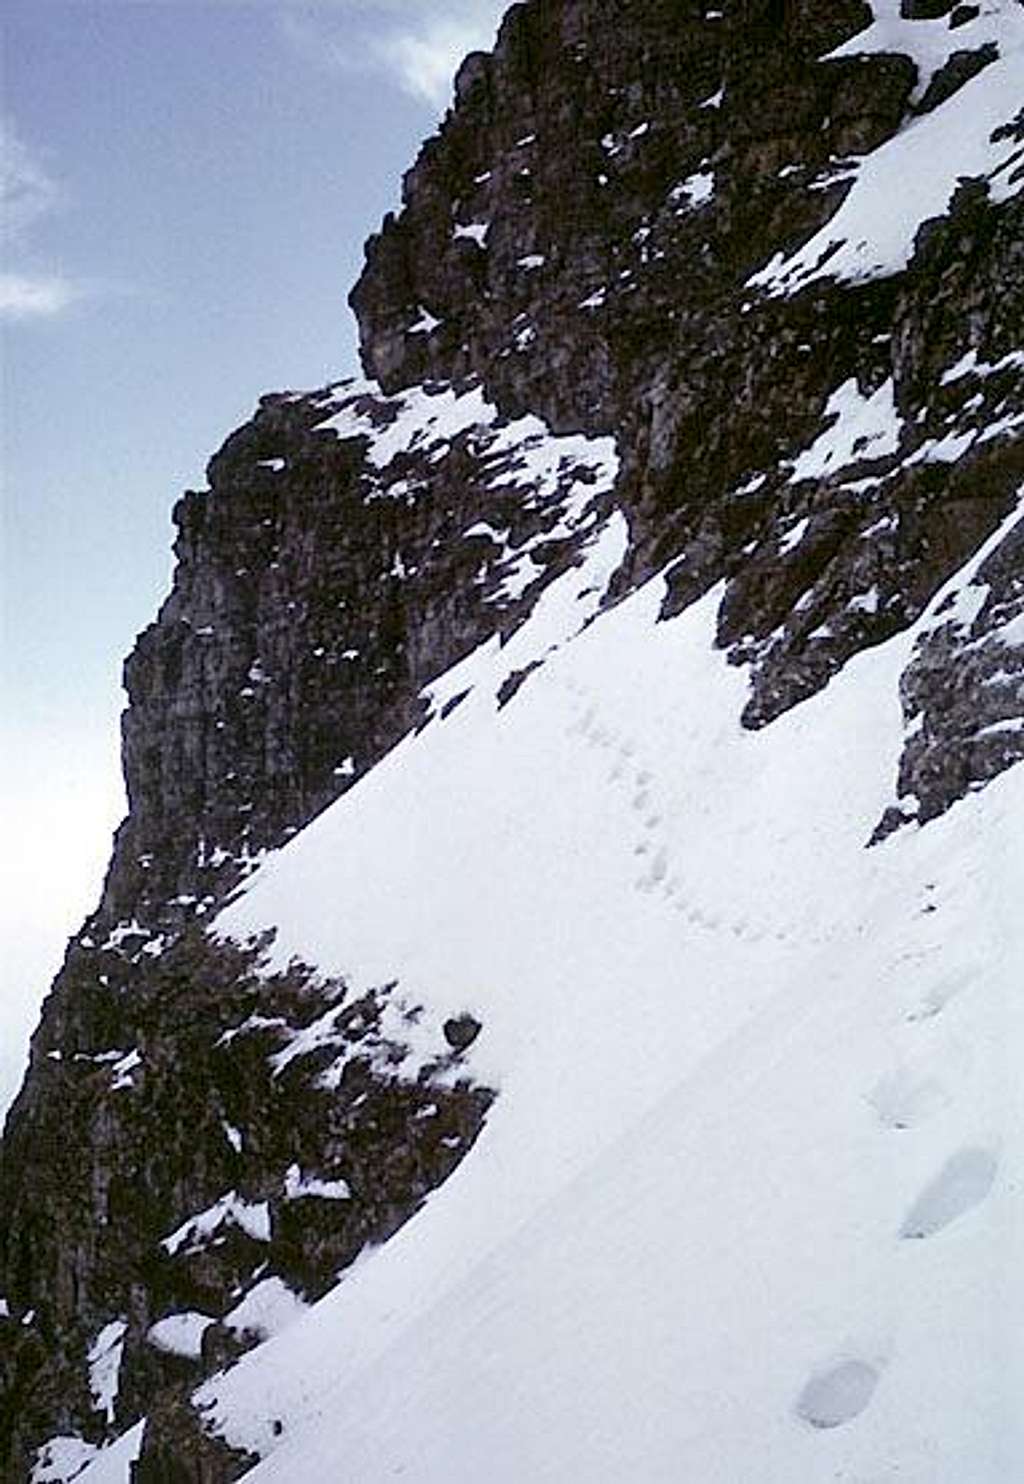 Reynolds Mountain<br> North Face & East Couloir Route